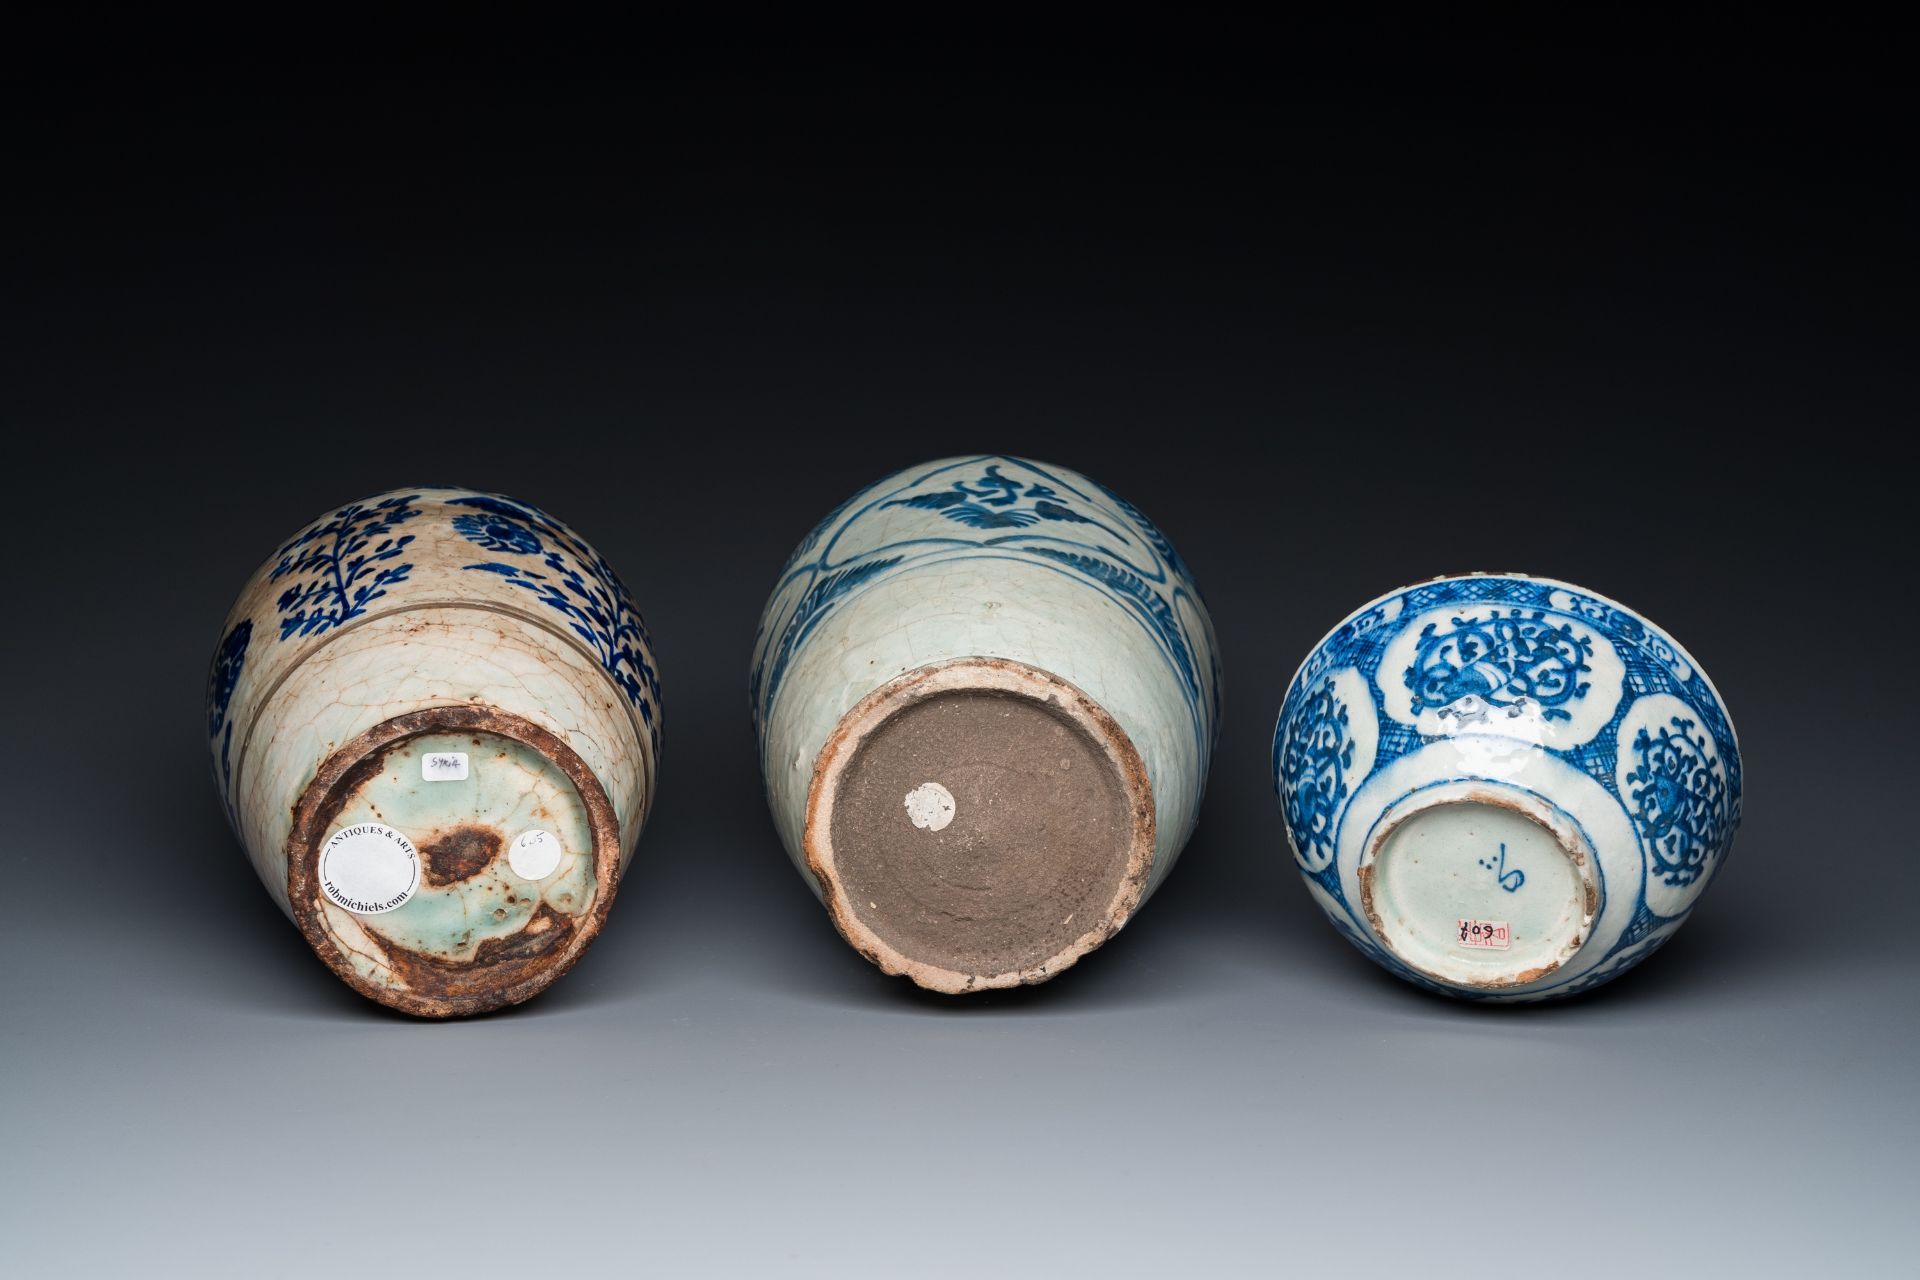 Two blue and white Islamic pottery storage jars and a bowl, Persia, 17/19th C. - Image 7 of 7